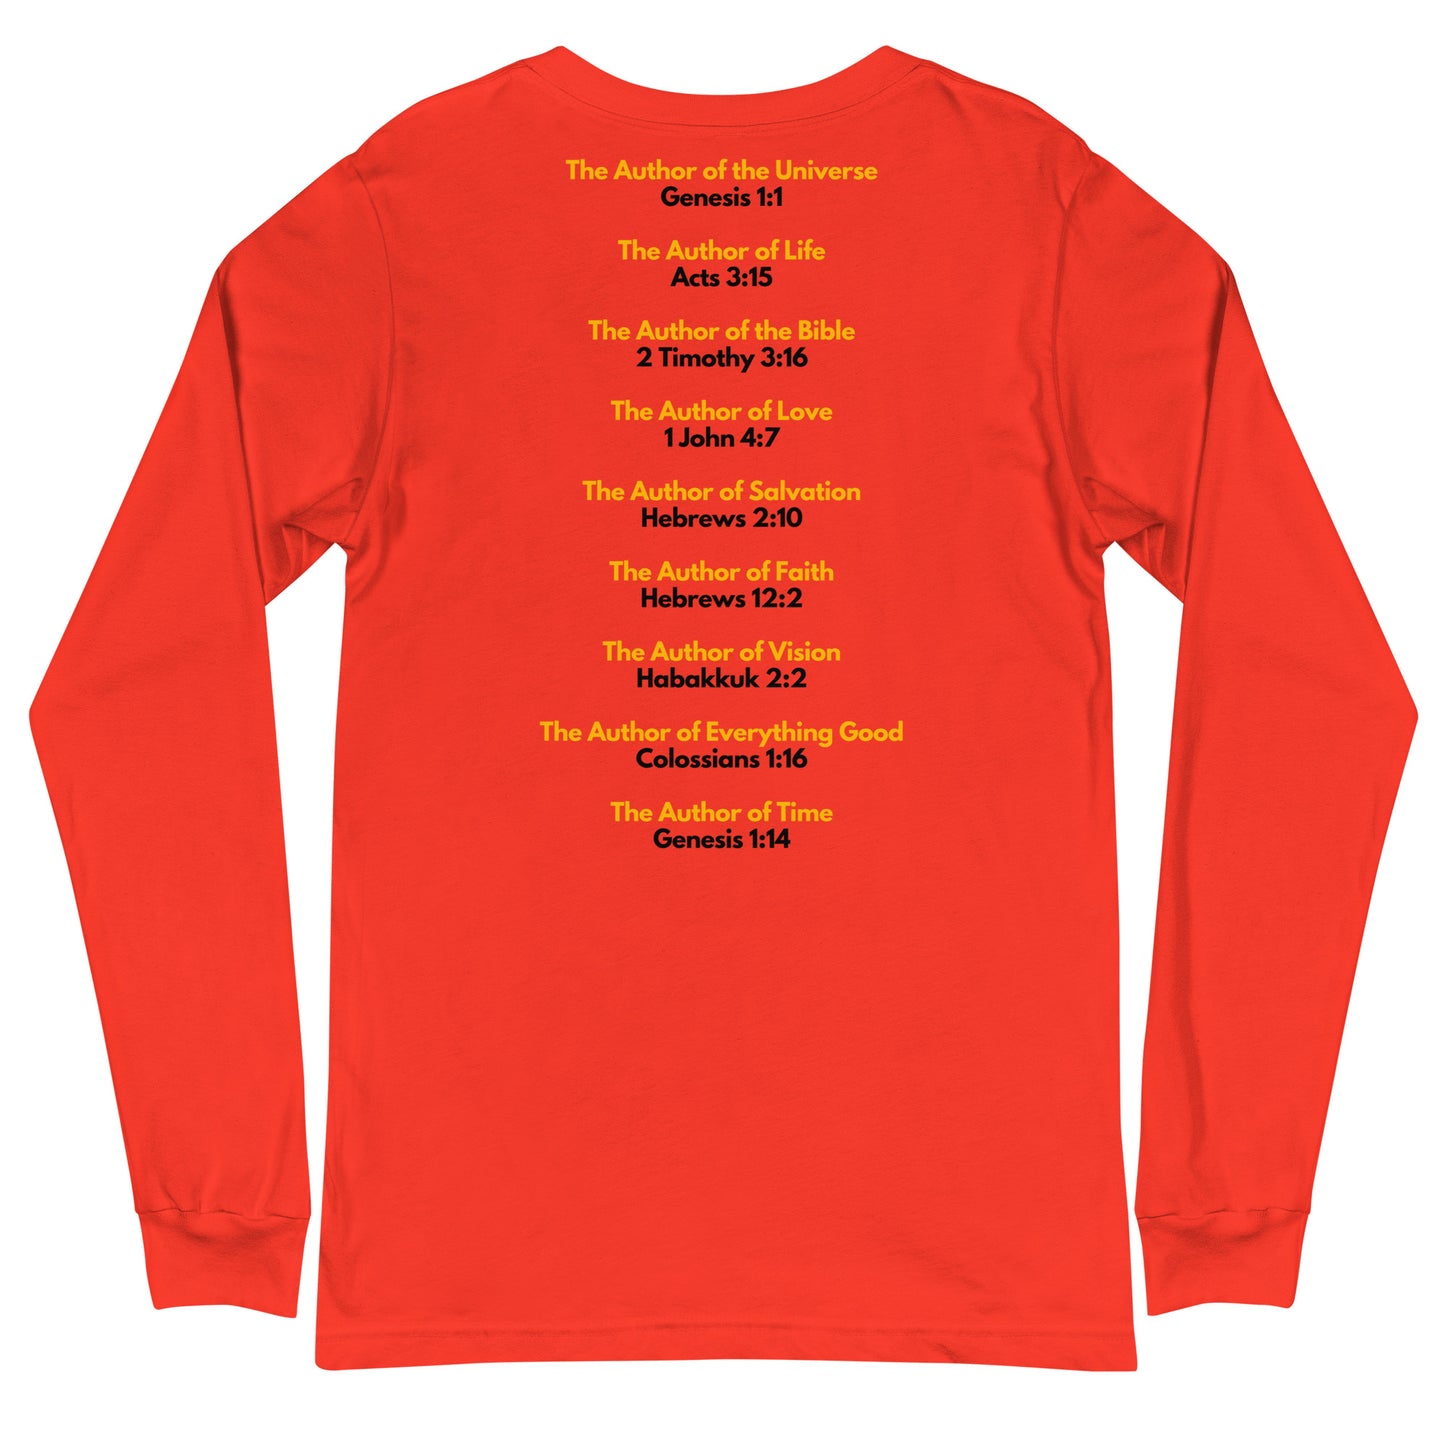 God Is The Author - Men and Teen's Long Sleeve Tee